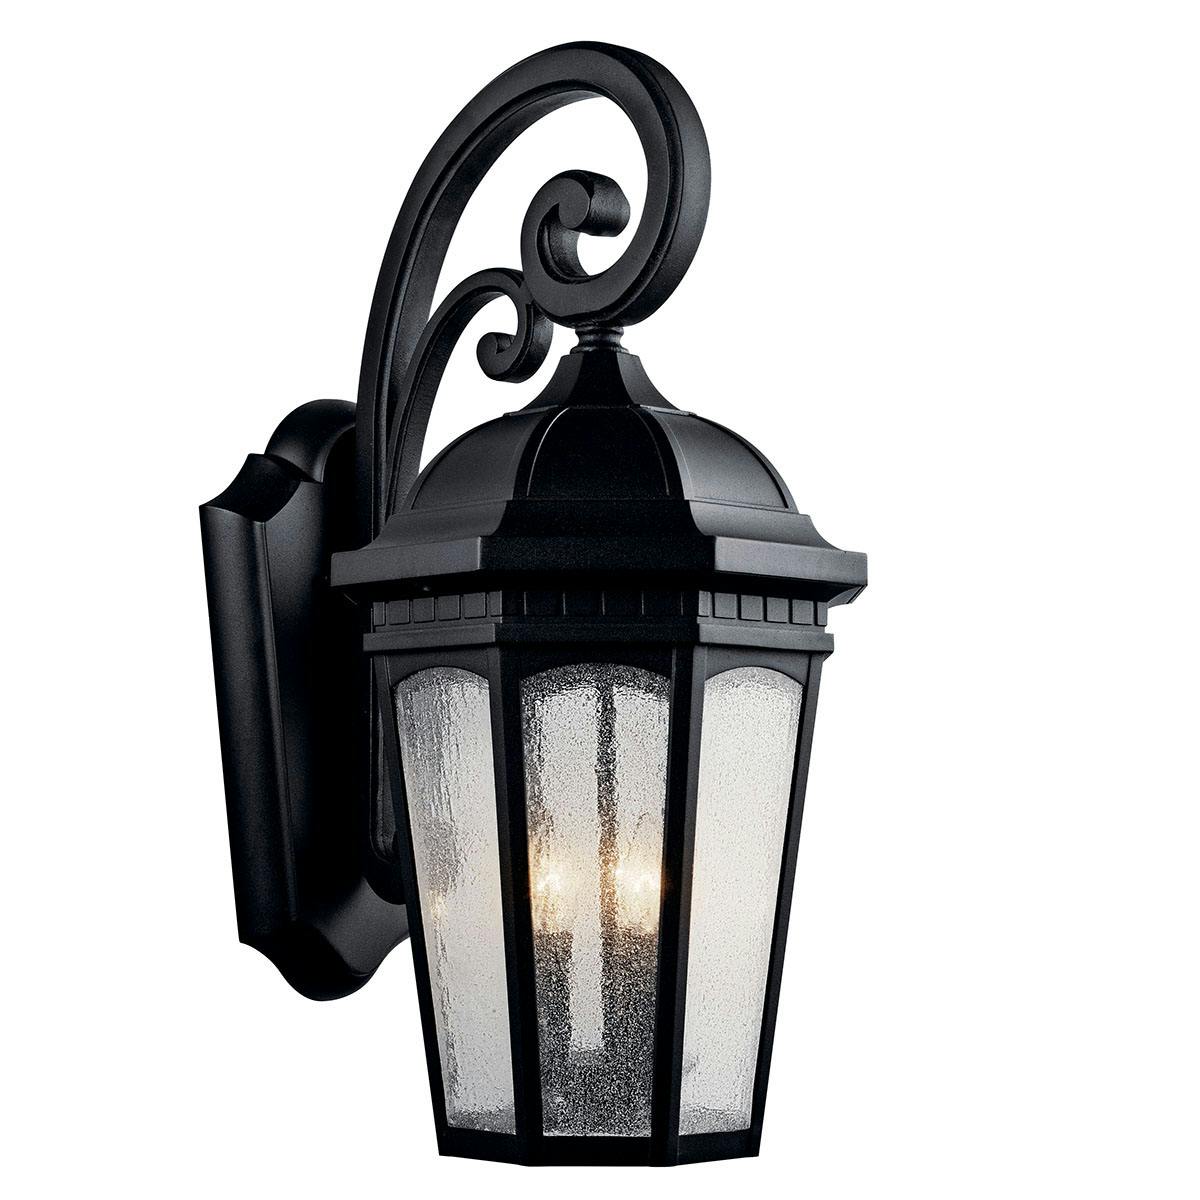 Courtyard 26.5" Wall Light Black on a white background